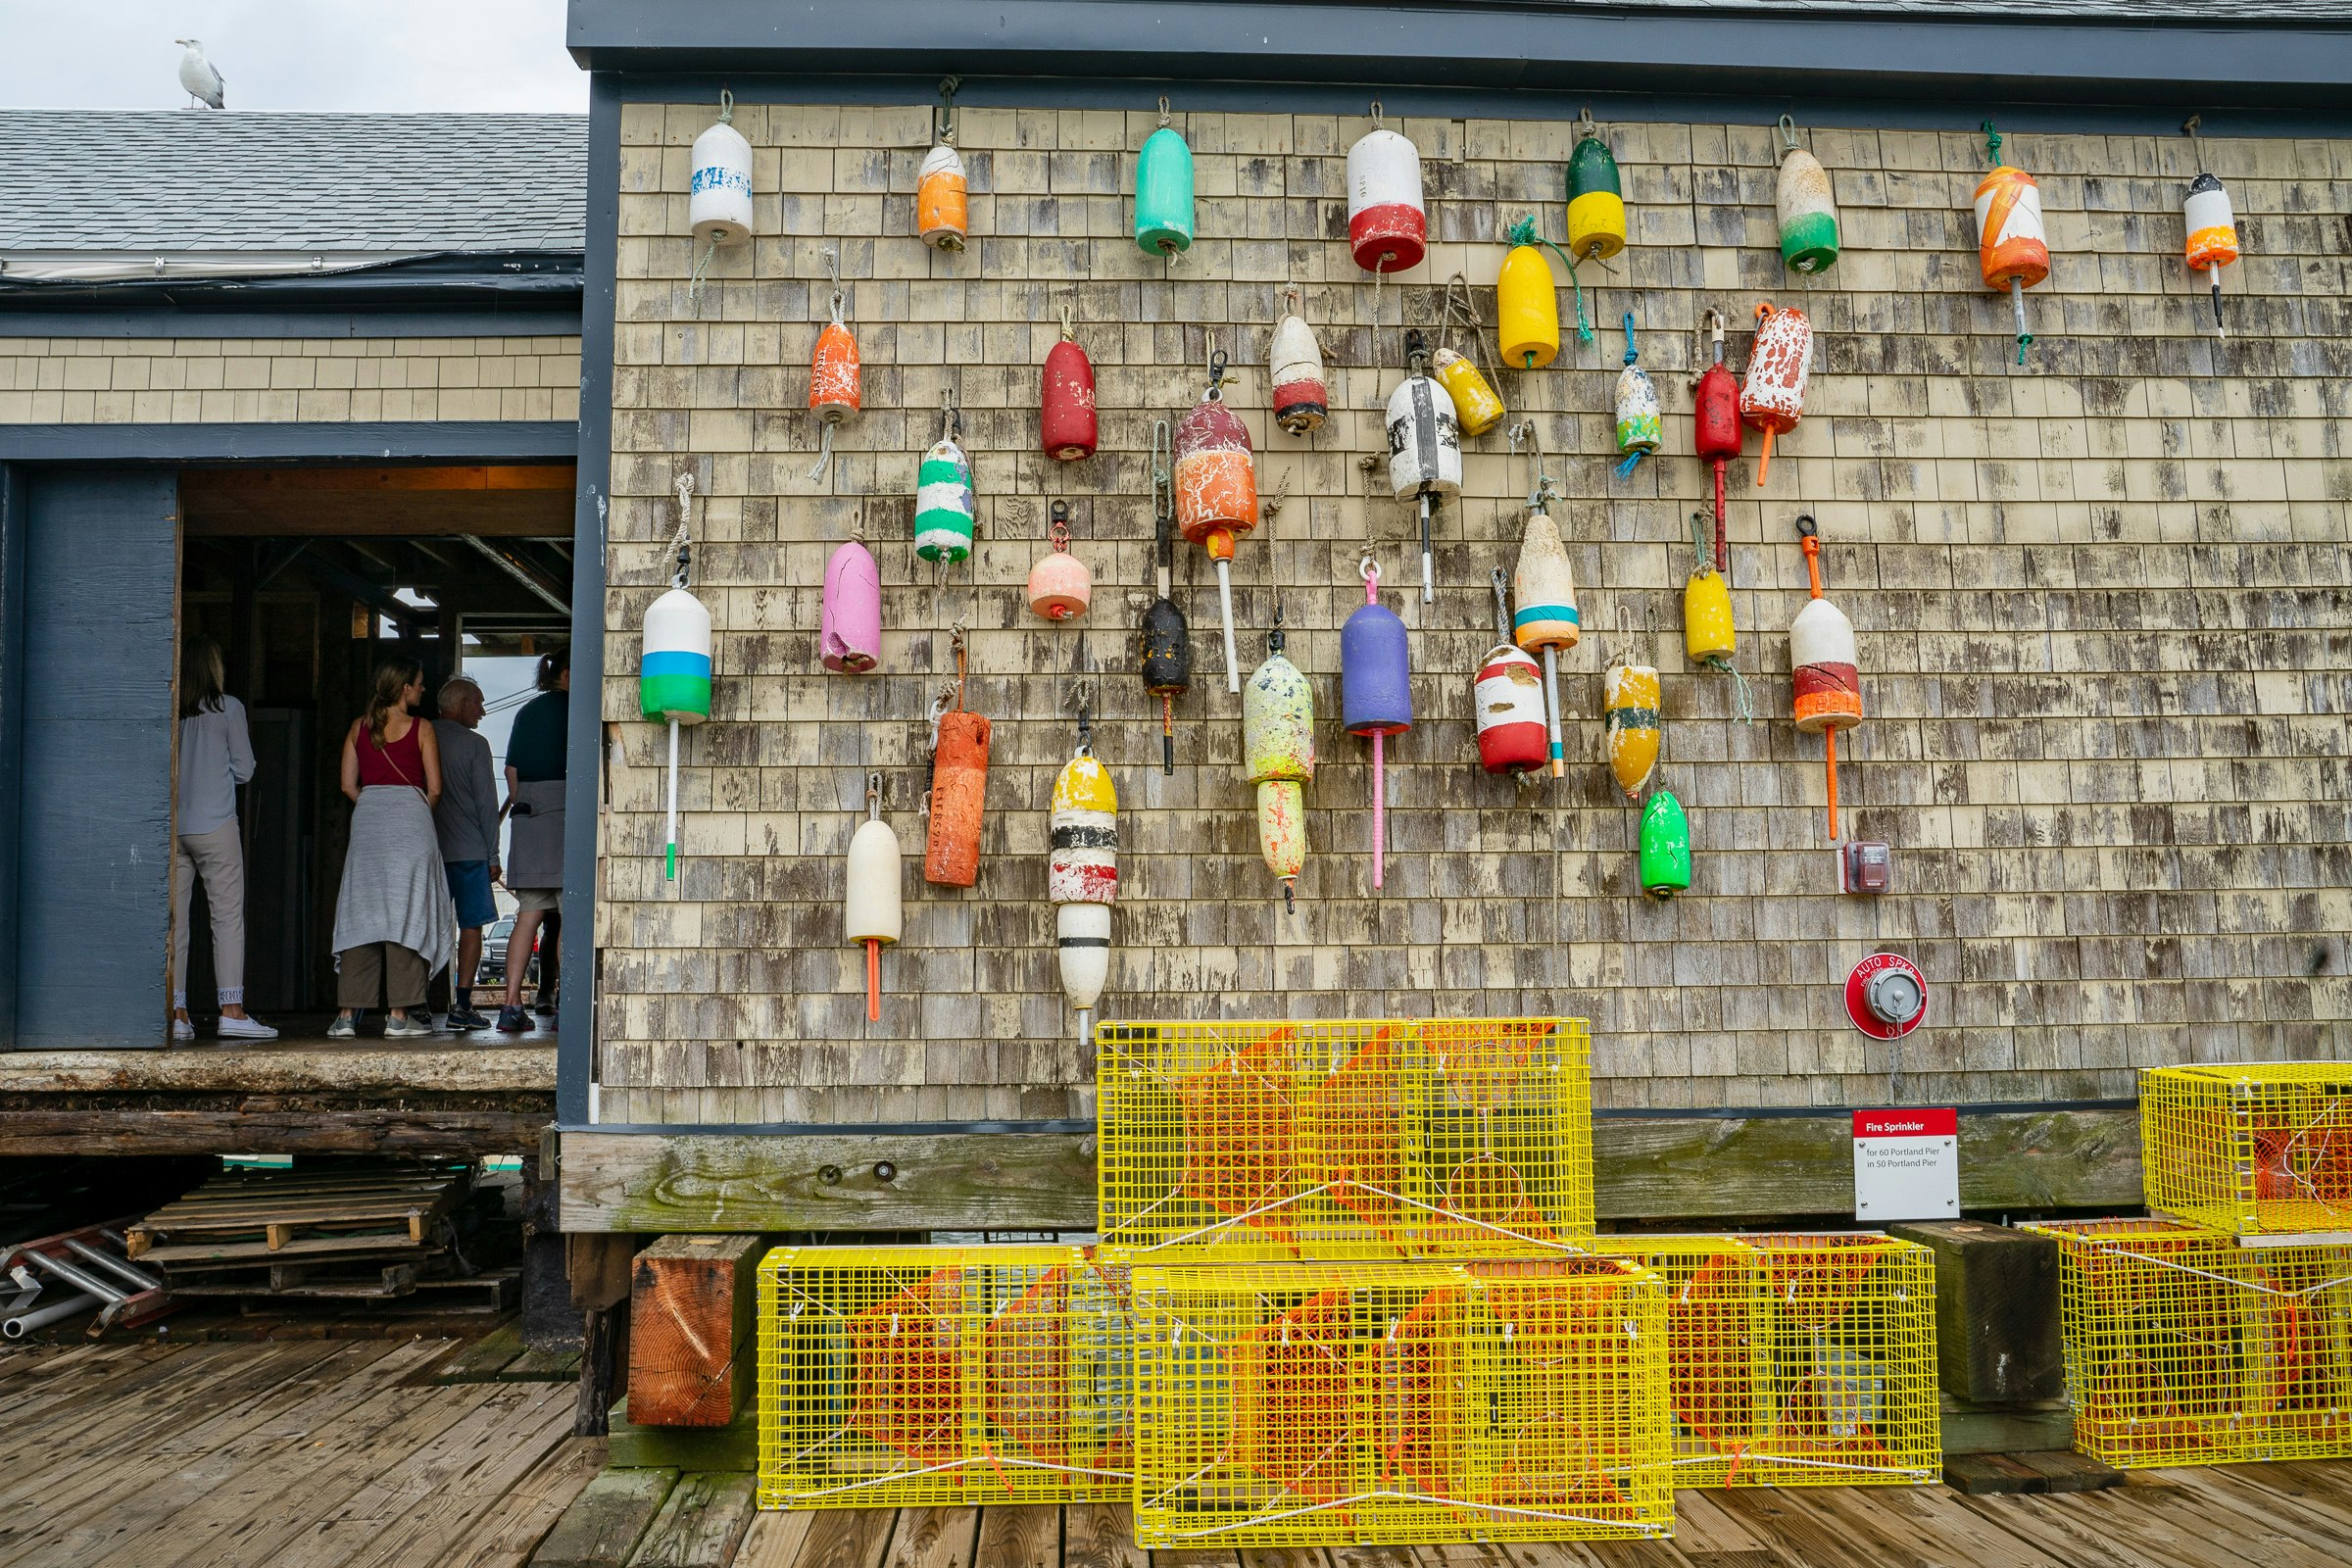 The worn wood shingles on the side of Luke's Lobster on the Portland pier is covered in colorful buoys over the wharf itself, where yellow lobster traps are stacked. To the left of the frame, up steps made from shipping palettes, stands a tour group with their backs to the camera 